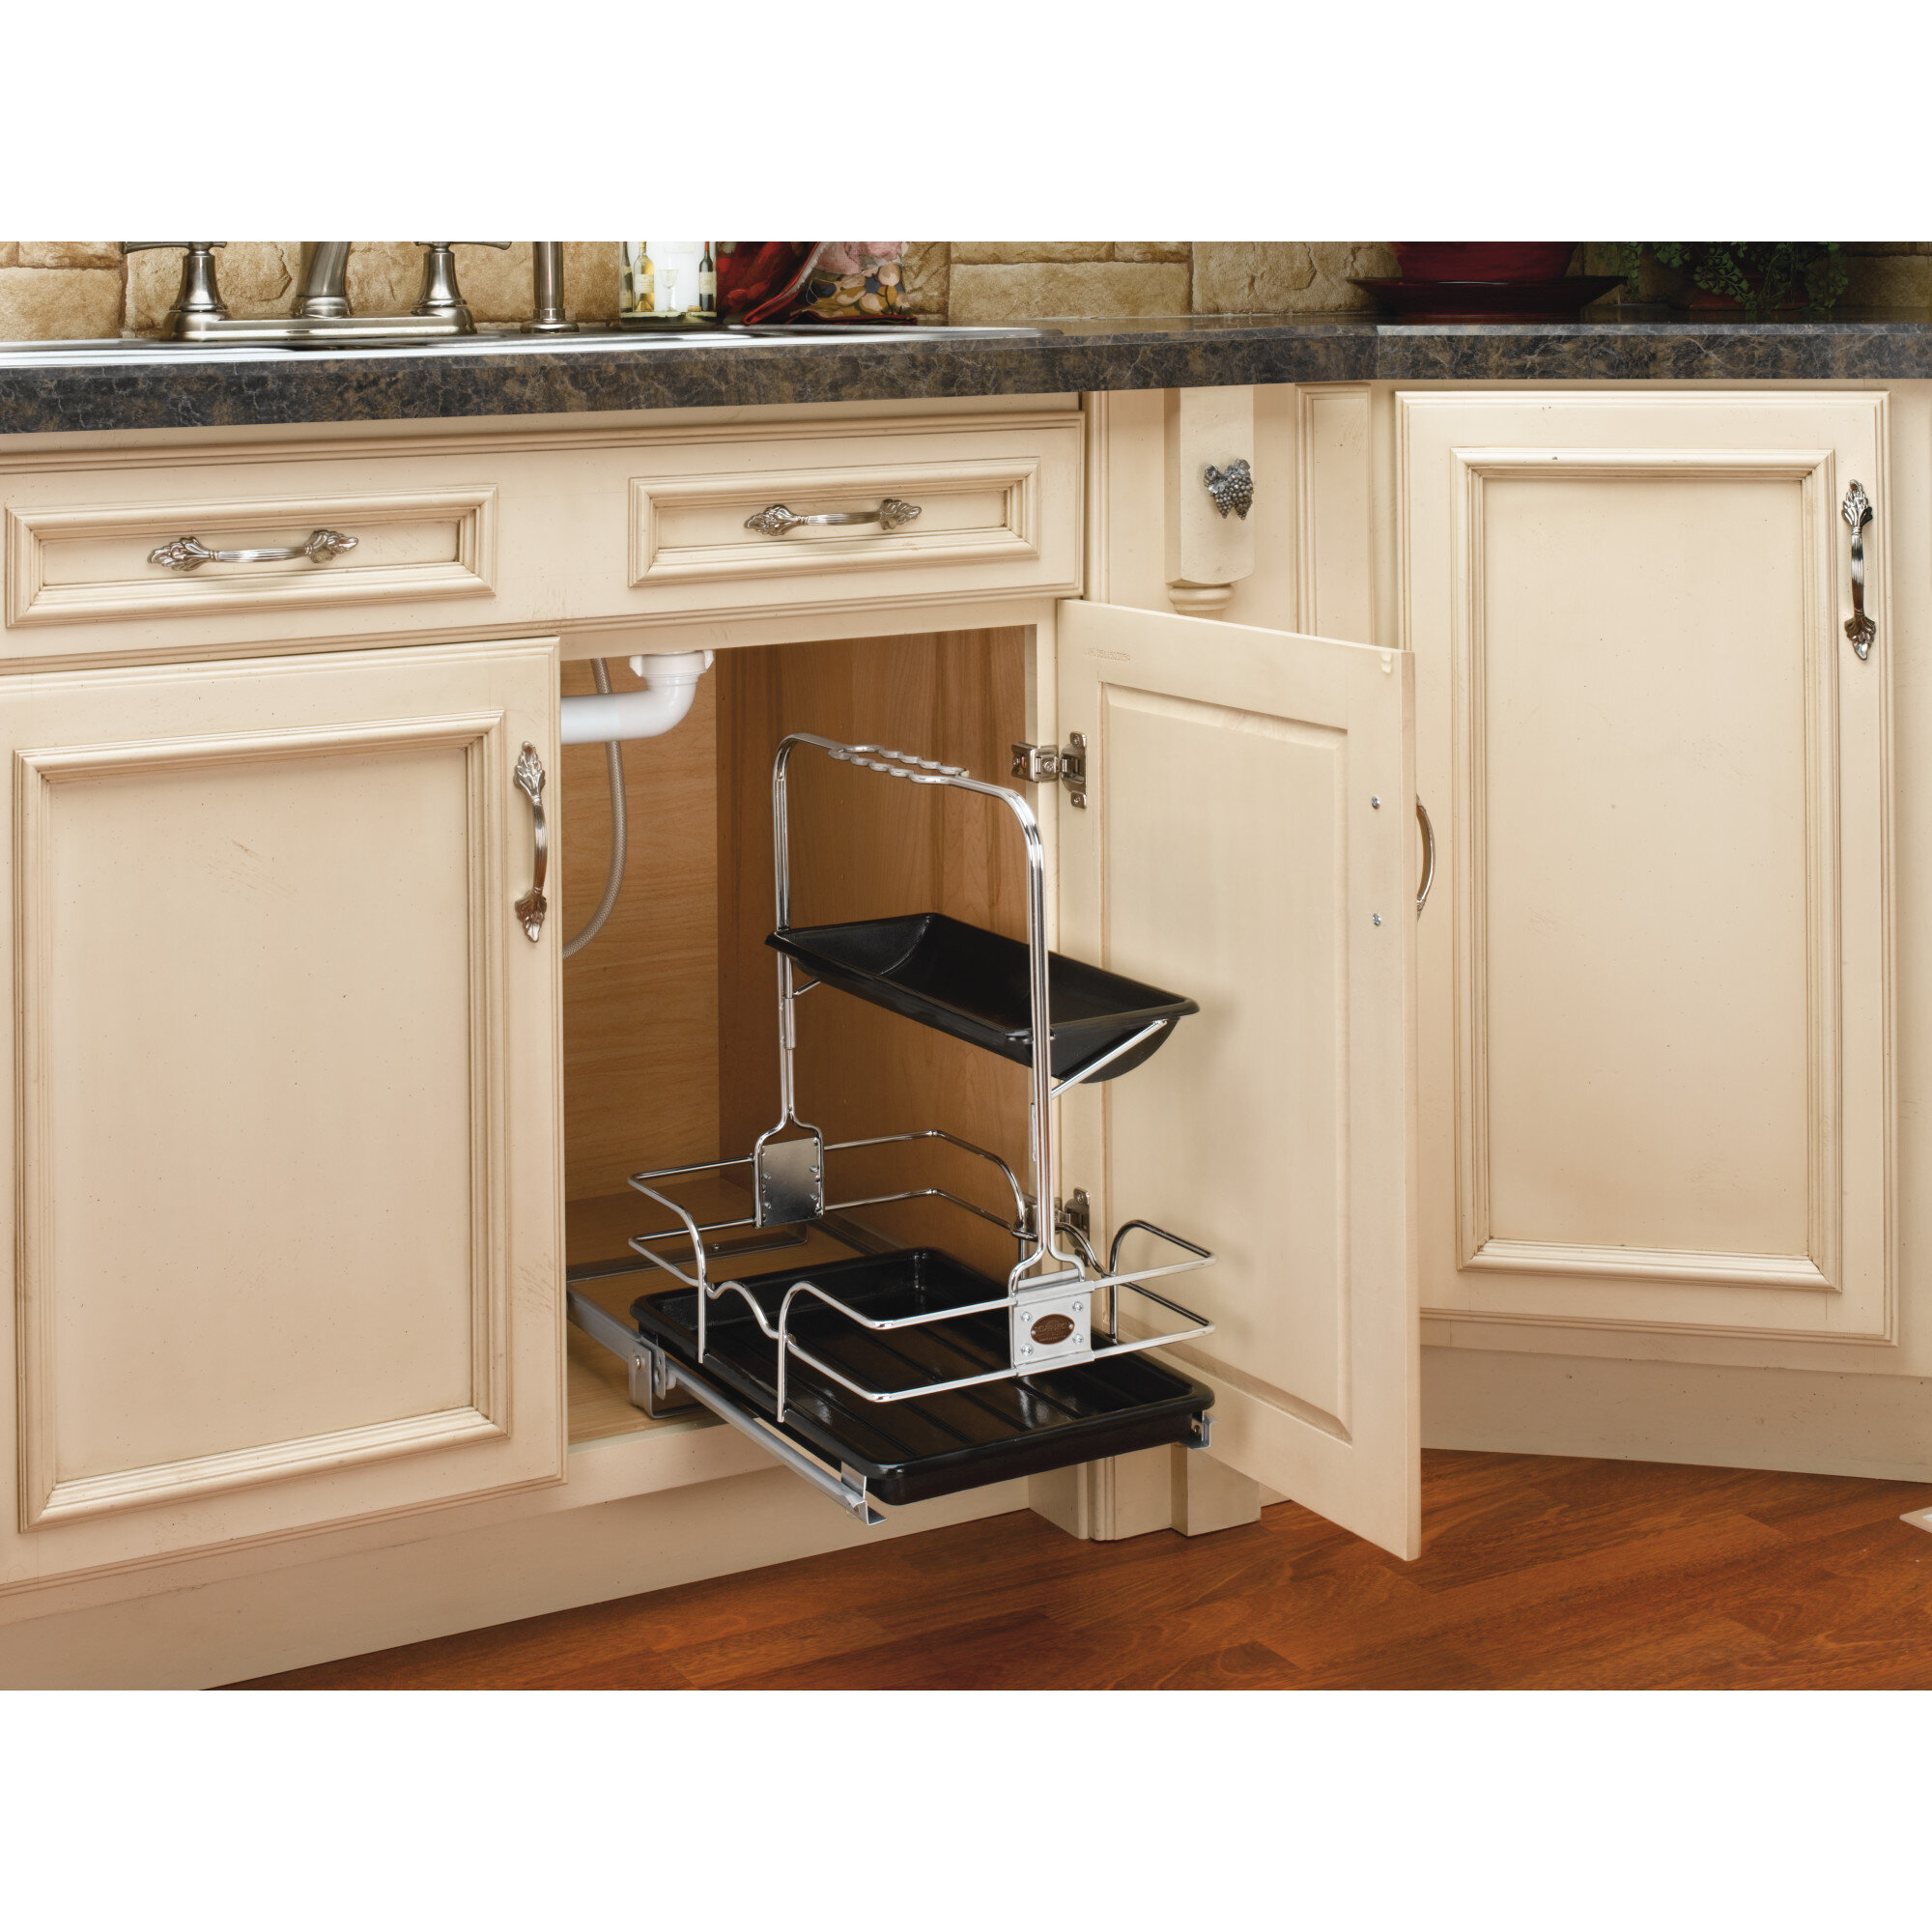 Rev-A-Shelf Undersink Pull Out Cleaning Organizer with Soft Close